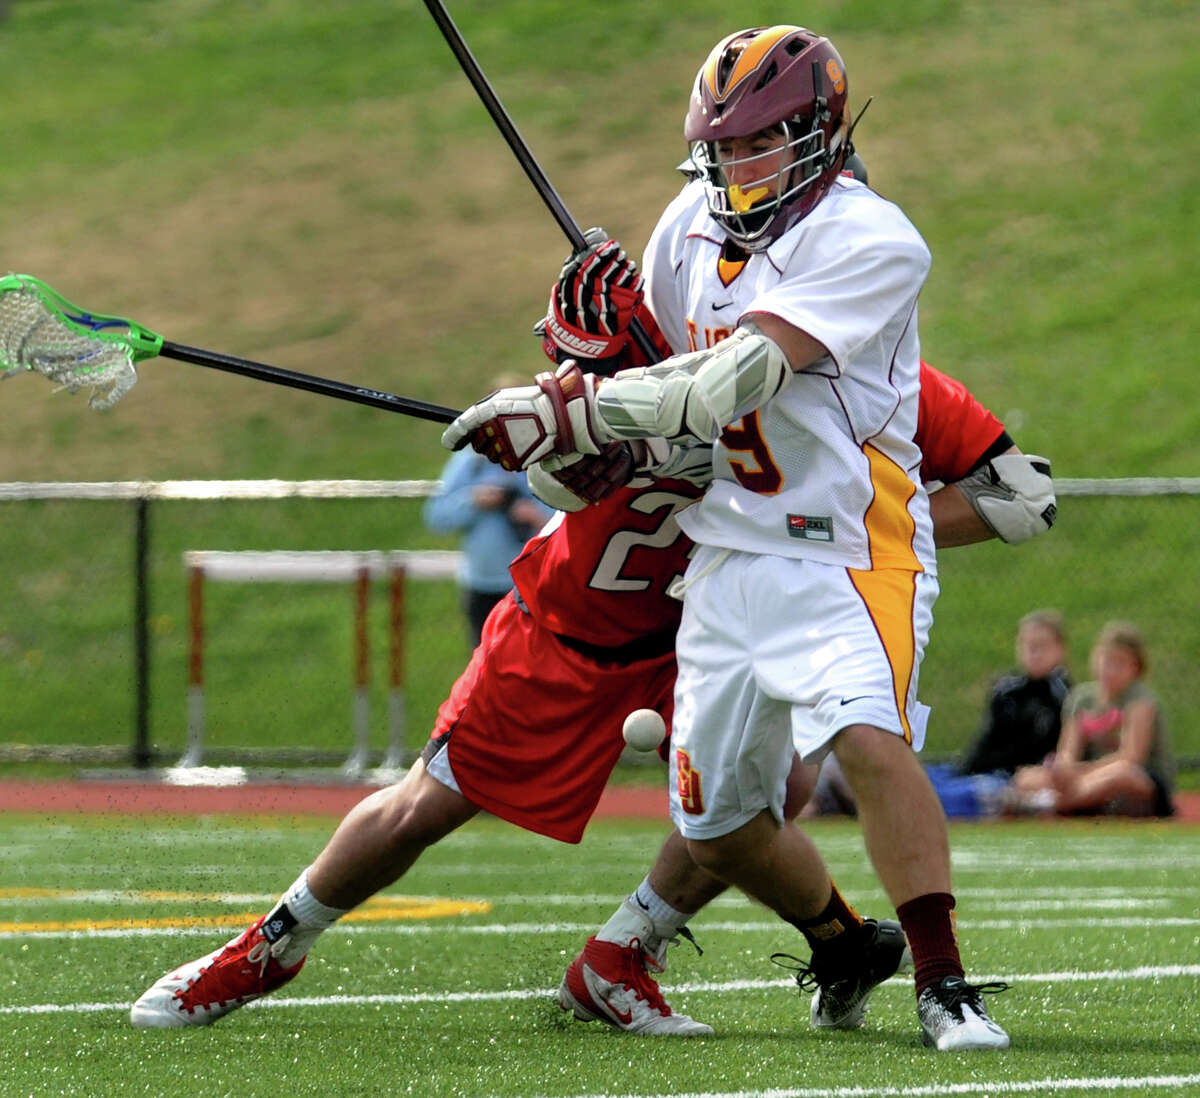 St. Joe's Christian Keator looses the ball as he is shoved from behind by New Canaan's #23 Griffin White, during boys lacrosse action in Trumbull, Conn. on Saturday April 14, 2012.